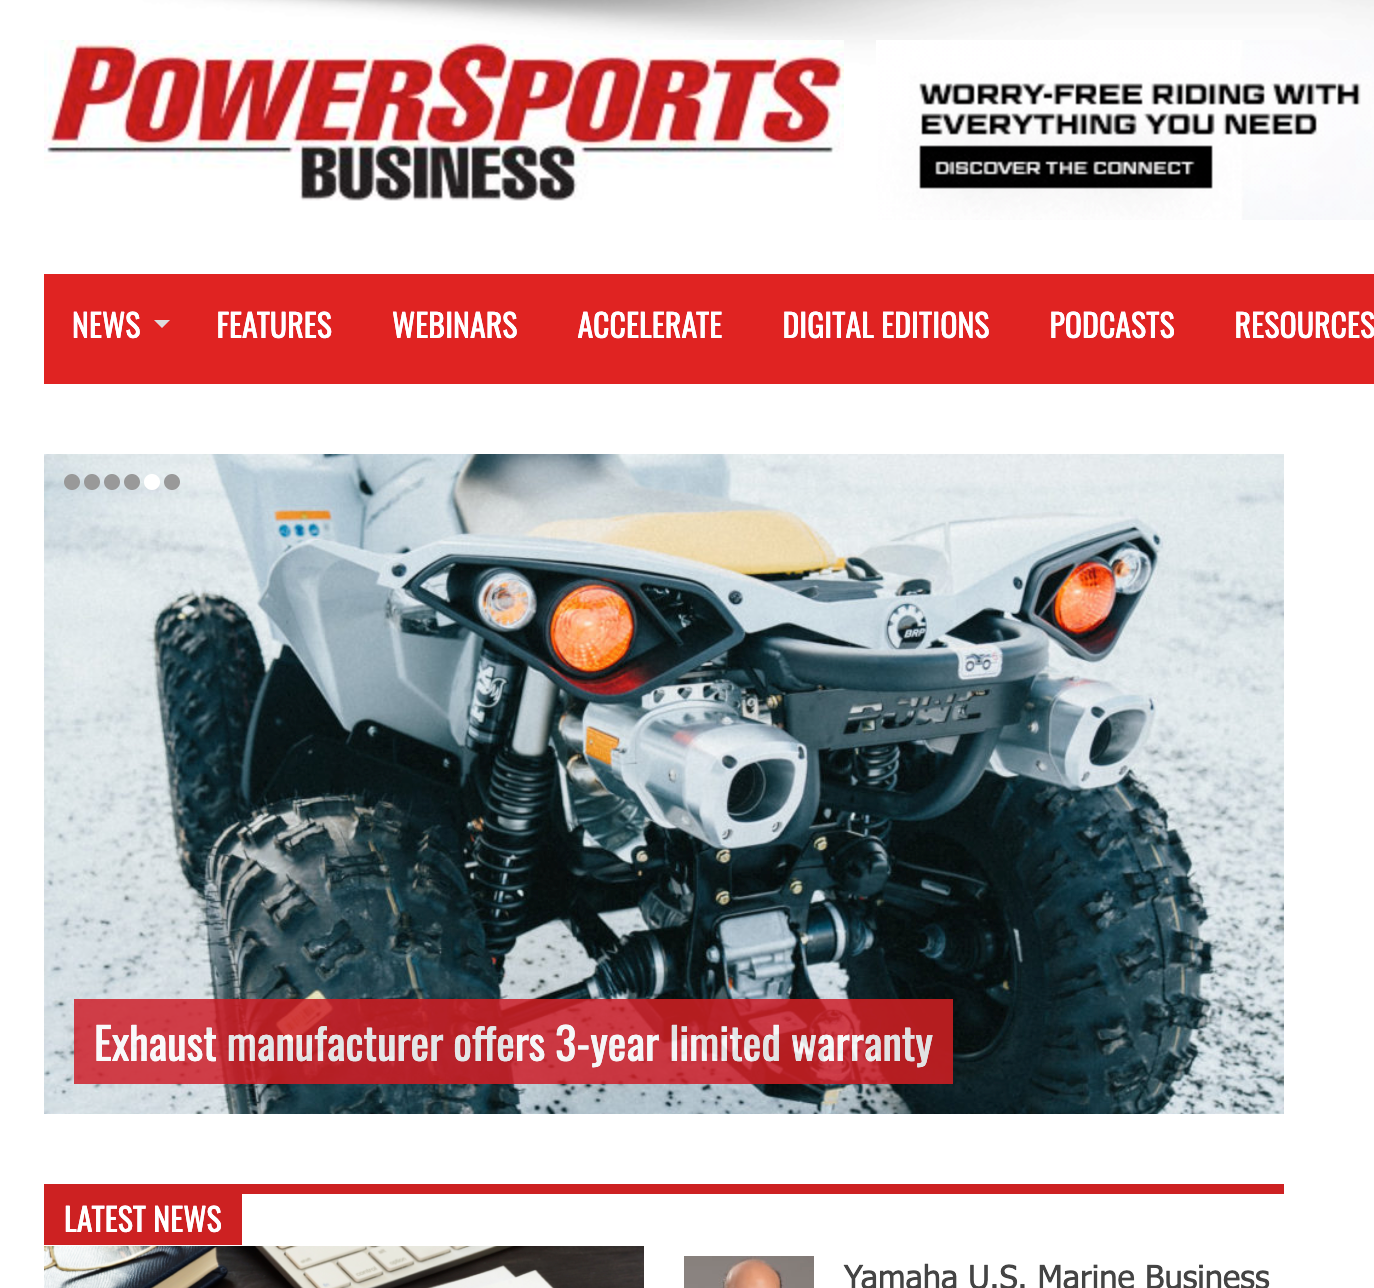 Breaking News: Our Increased Warranty gets Noticed by PowerSport Business!